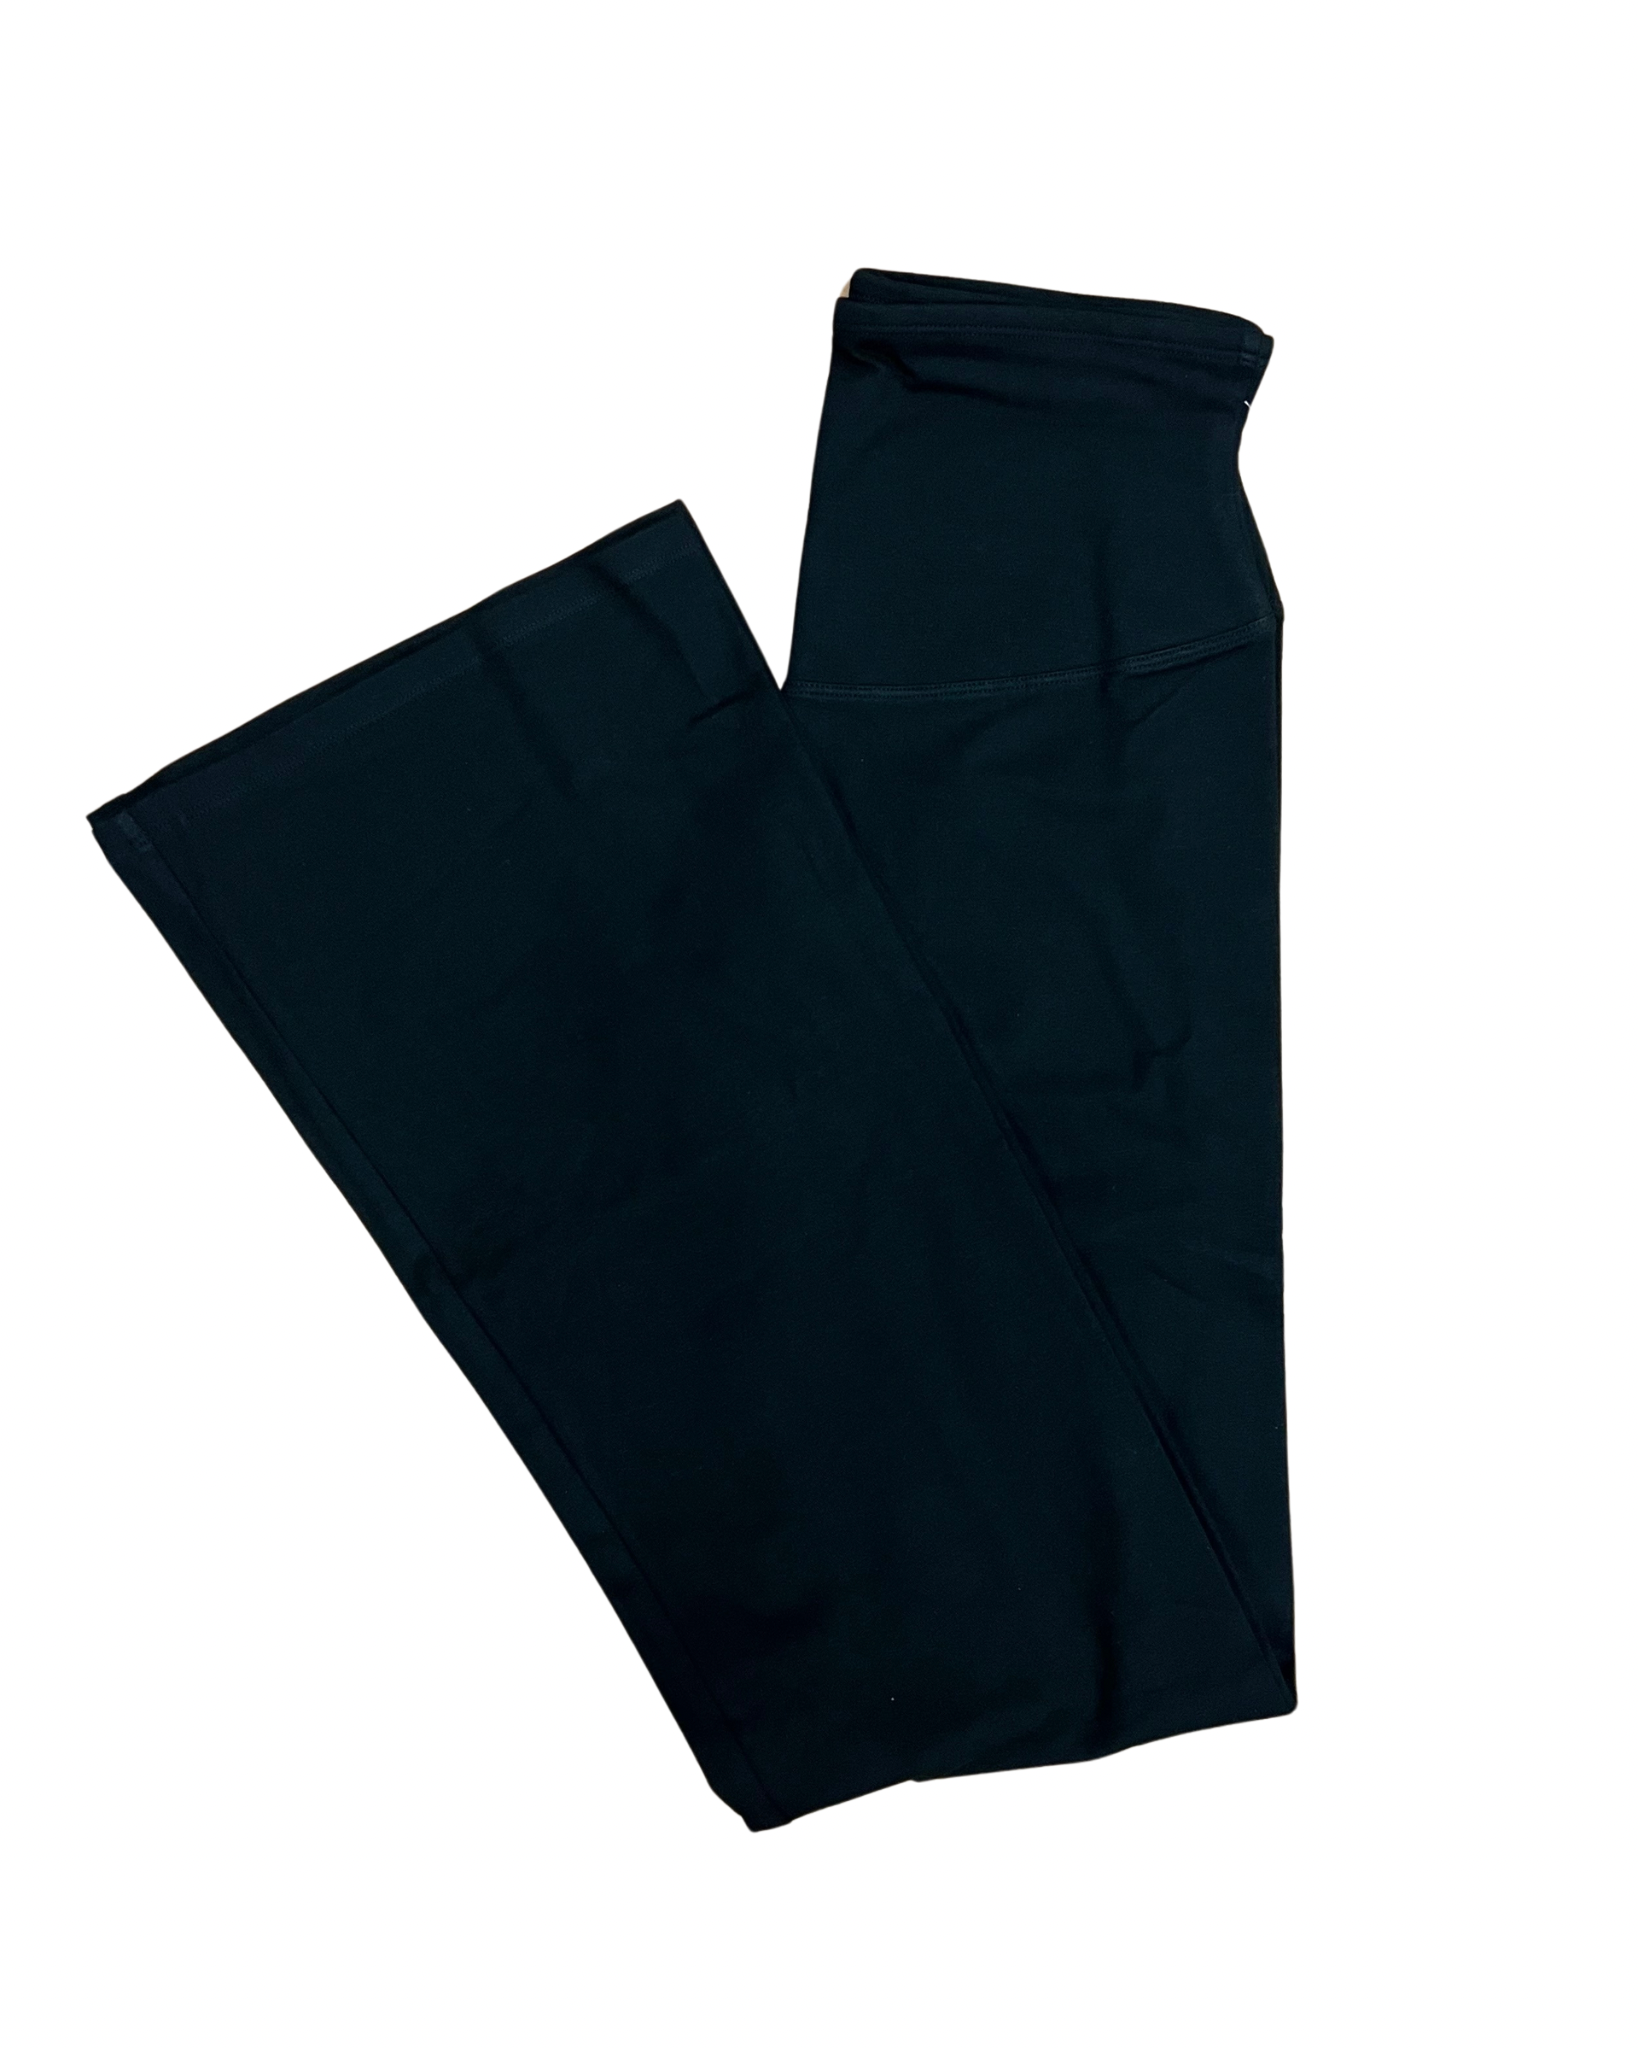 Yummie Susie Cotton Flare Shaping Leggings in Black